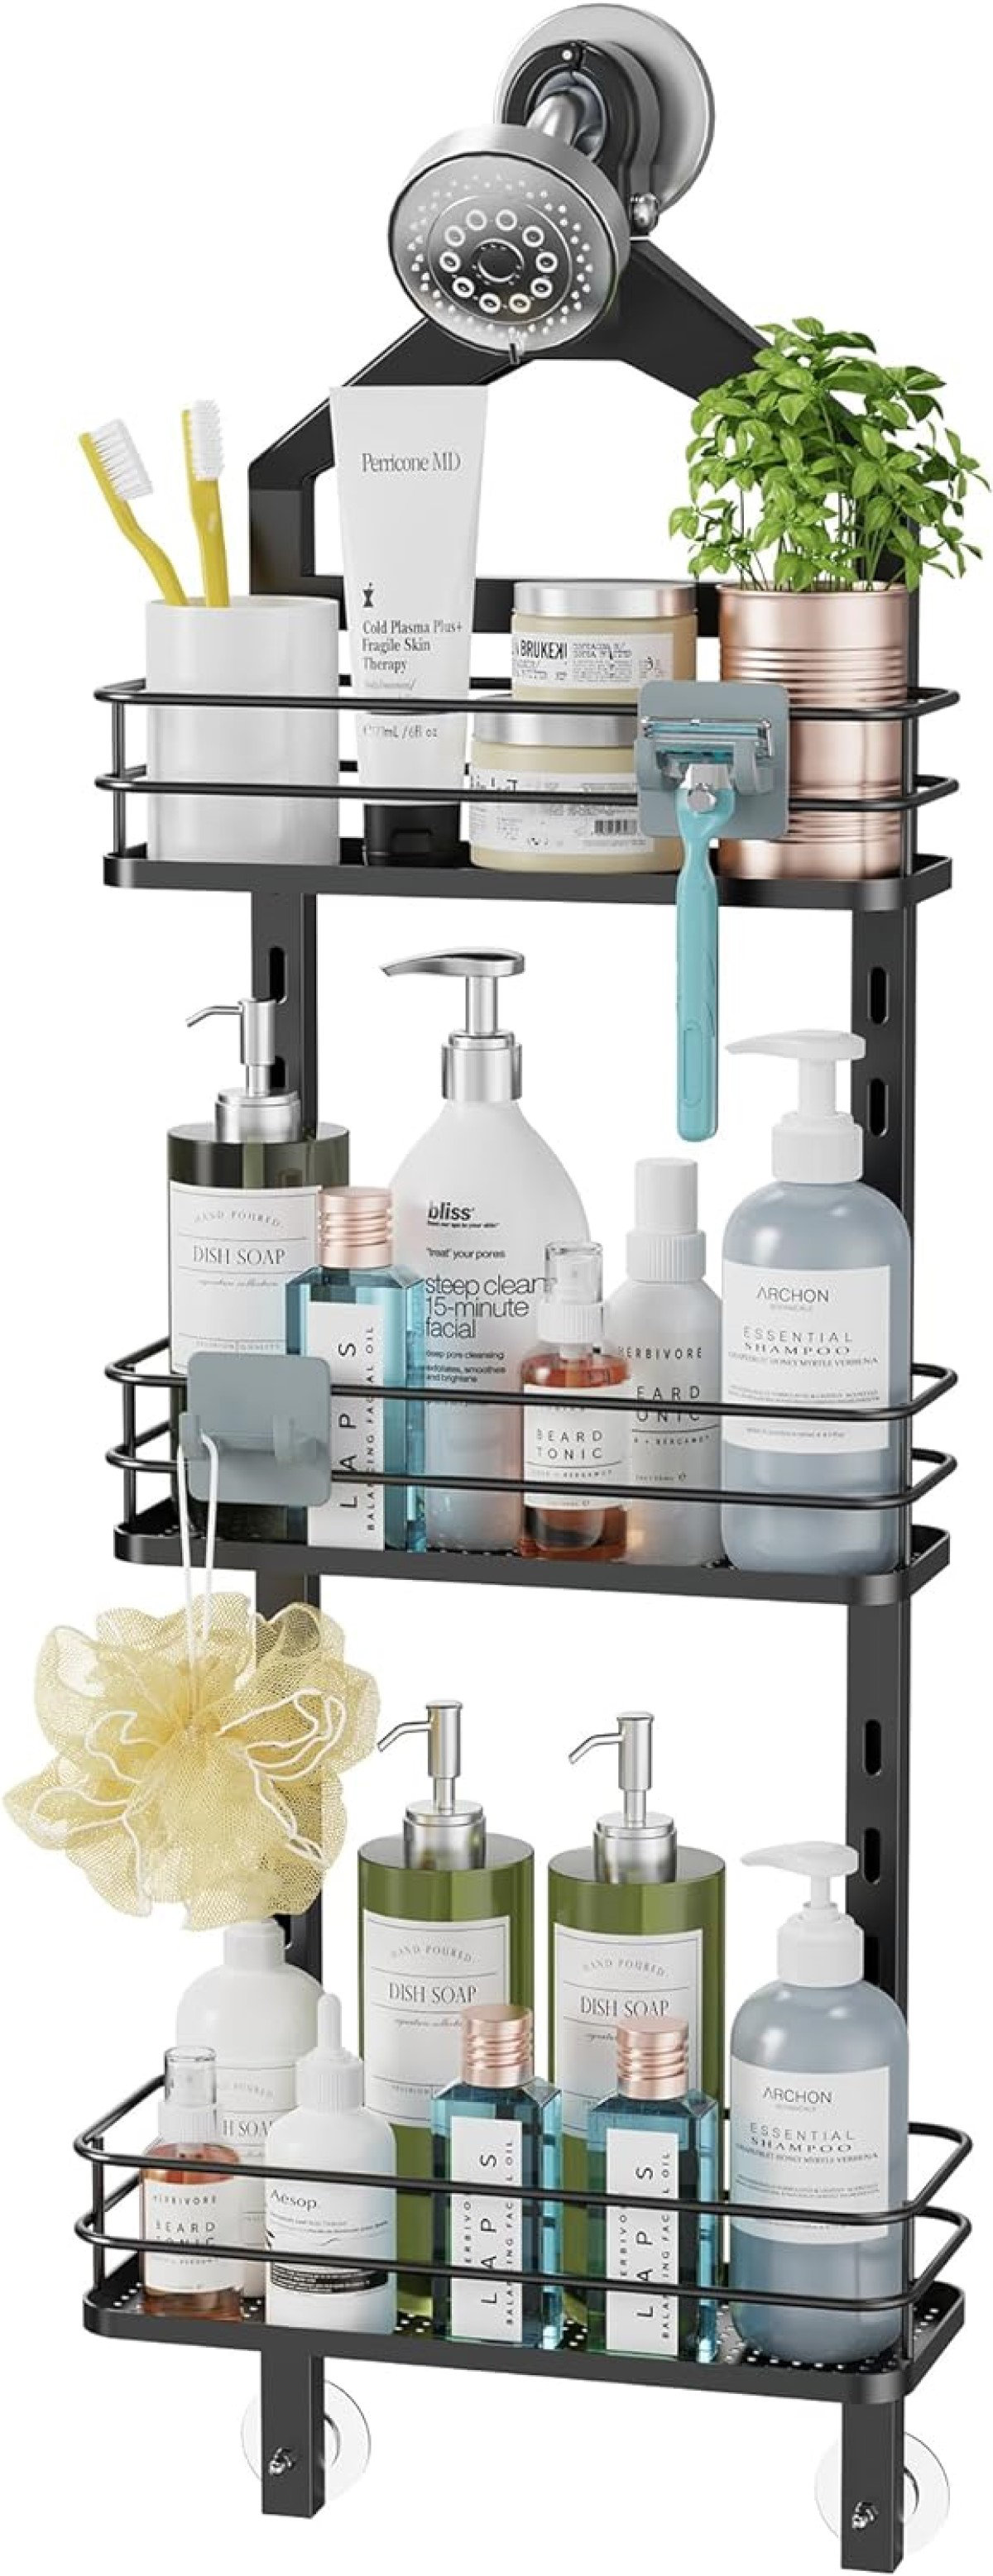 Rebrilliant Macelyn Suction Stainless Steel Shower Caddy